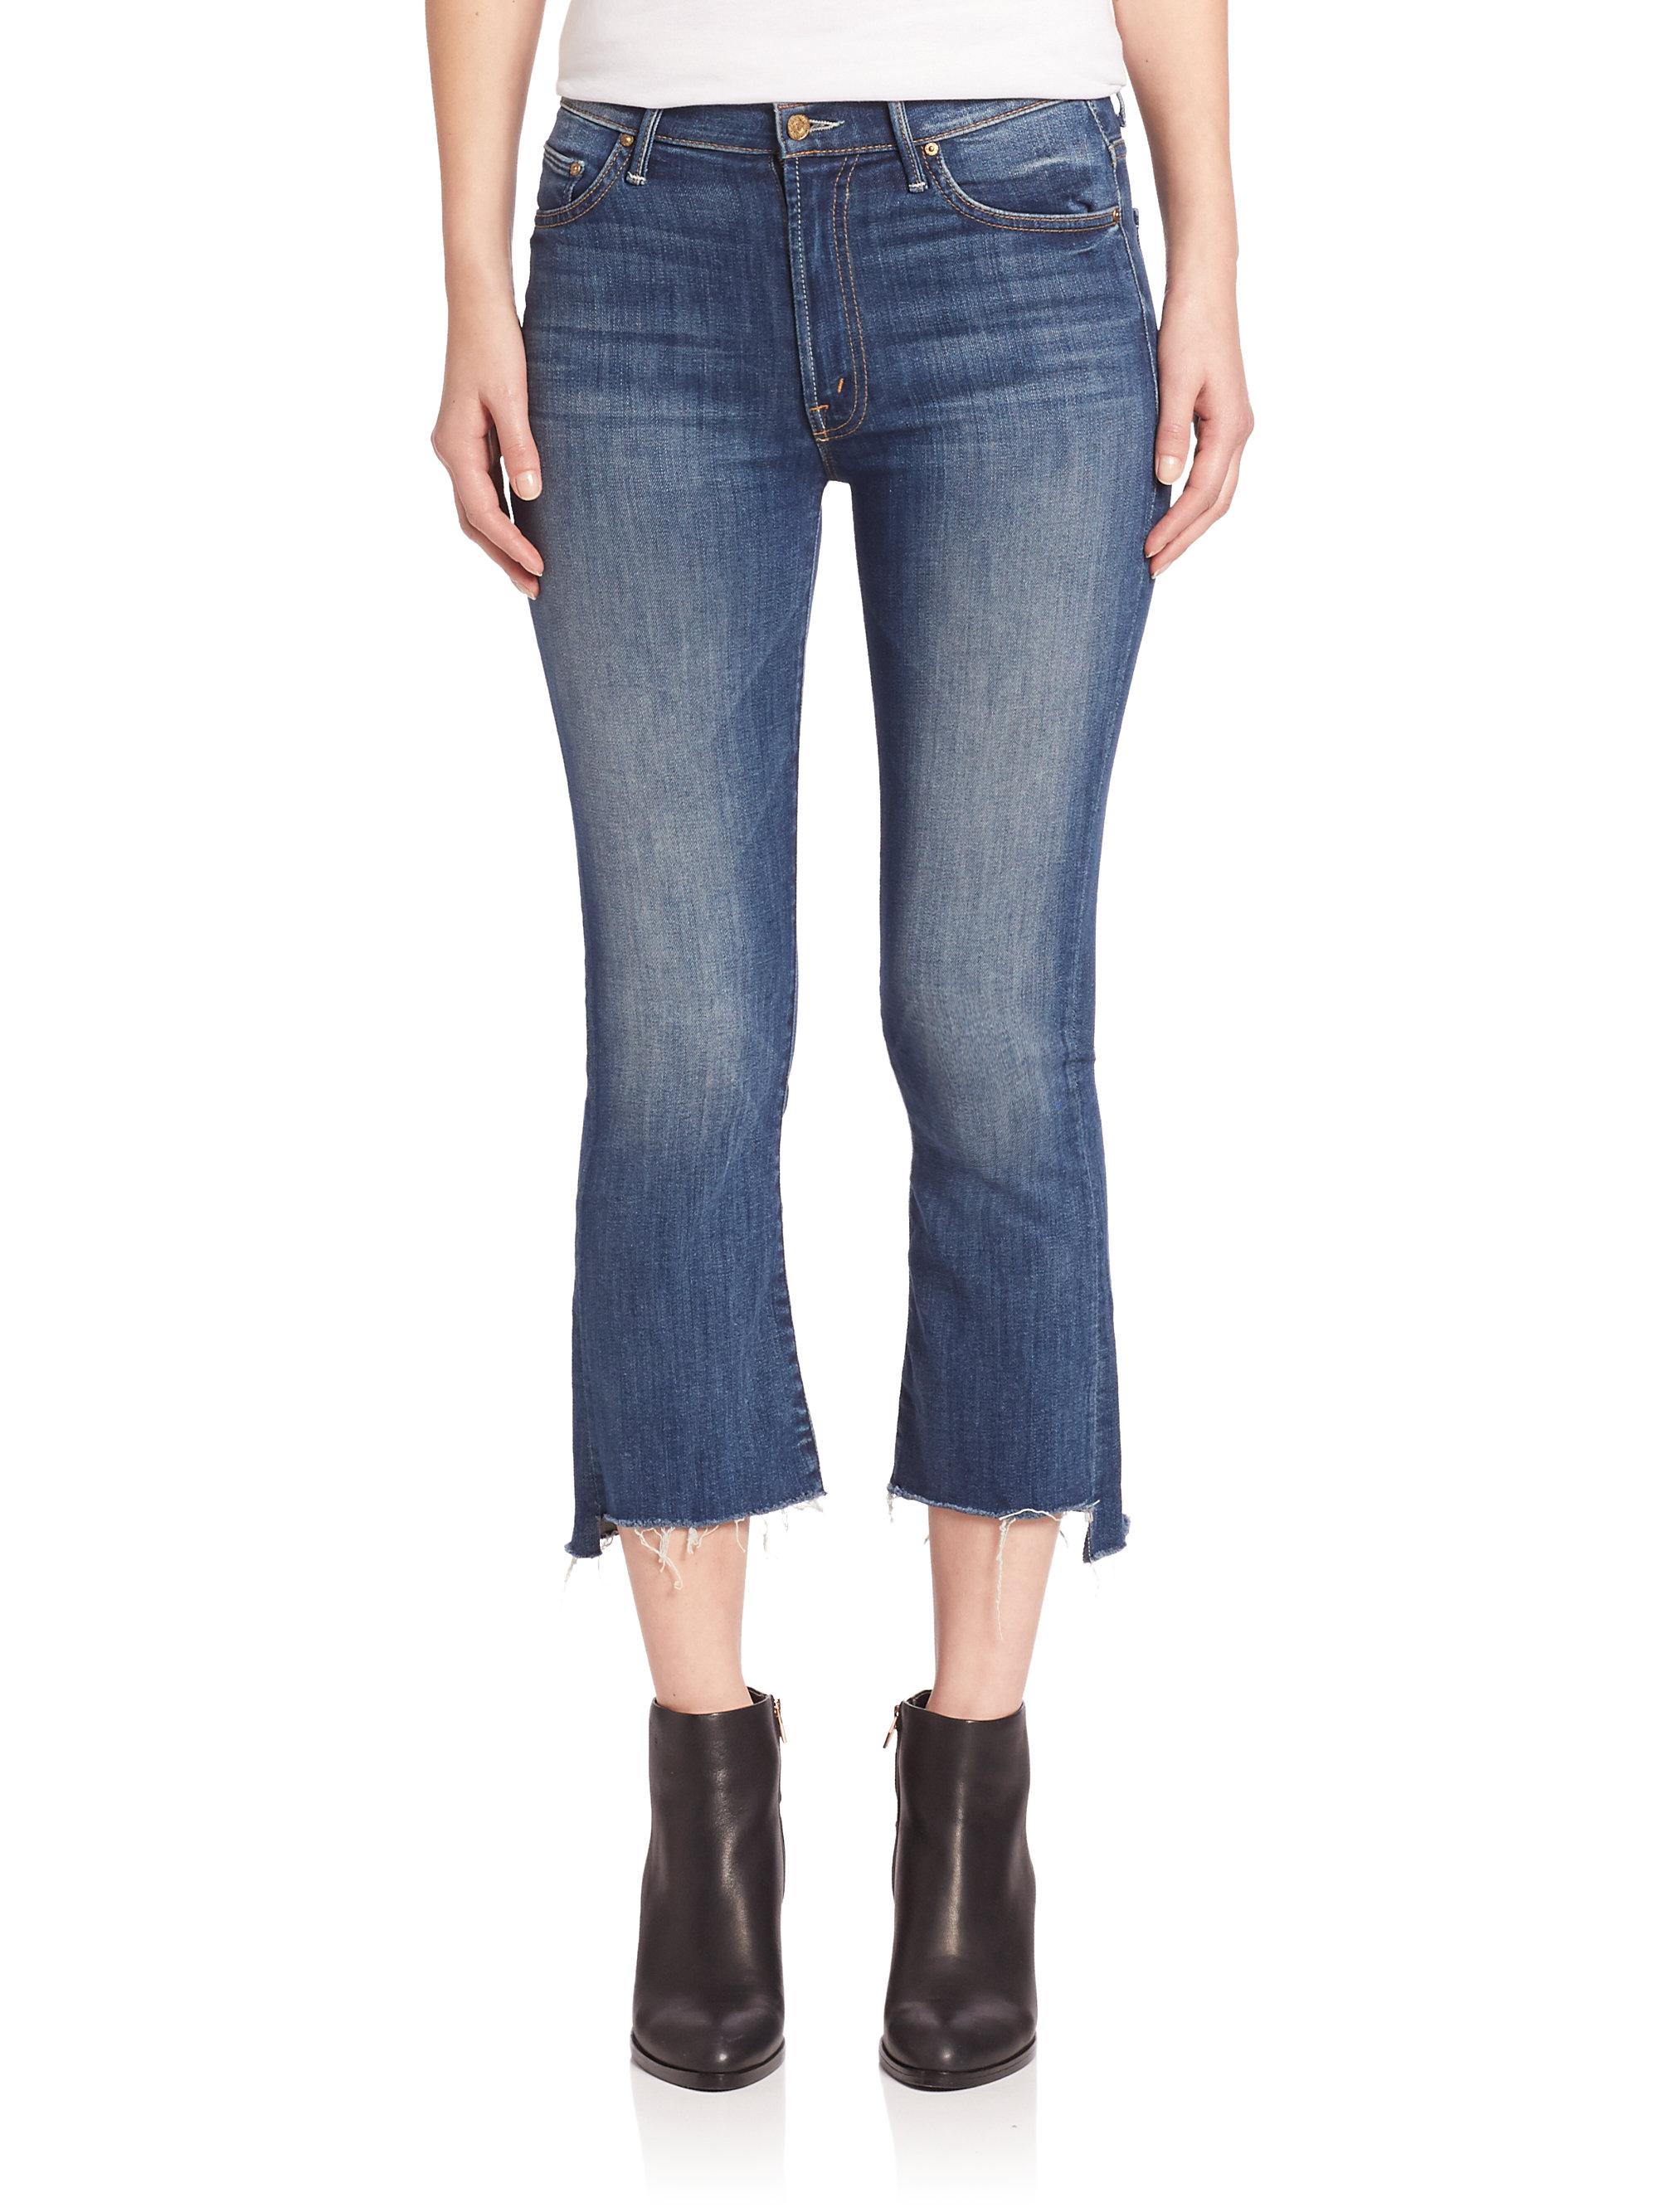 Lyst - Mother Insider Cropped Raw-edge Jeans in Black